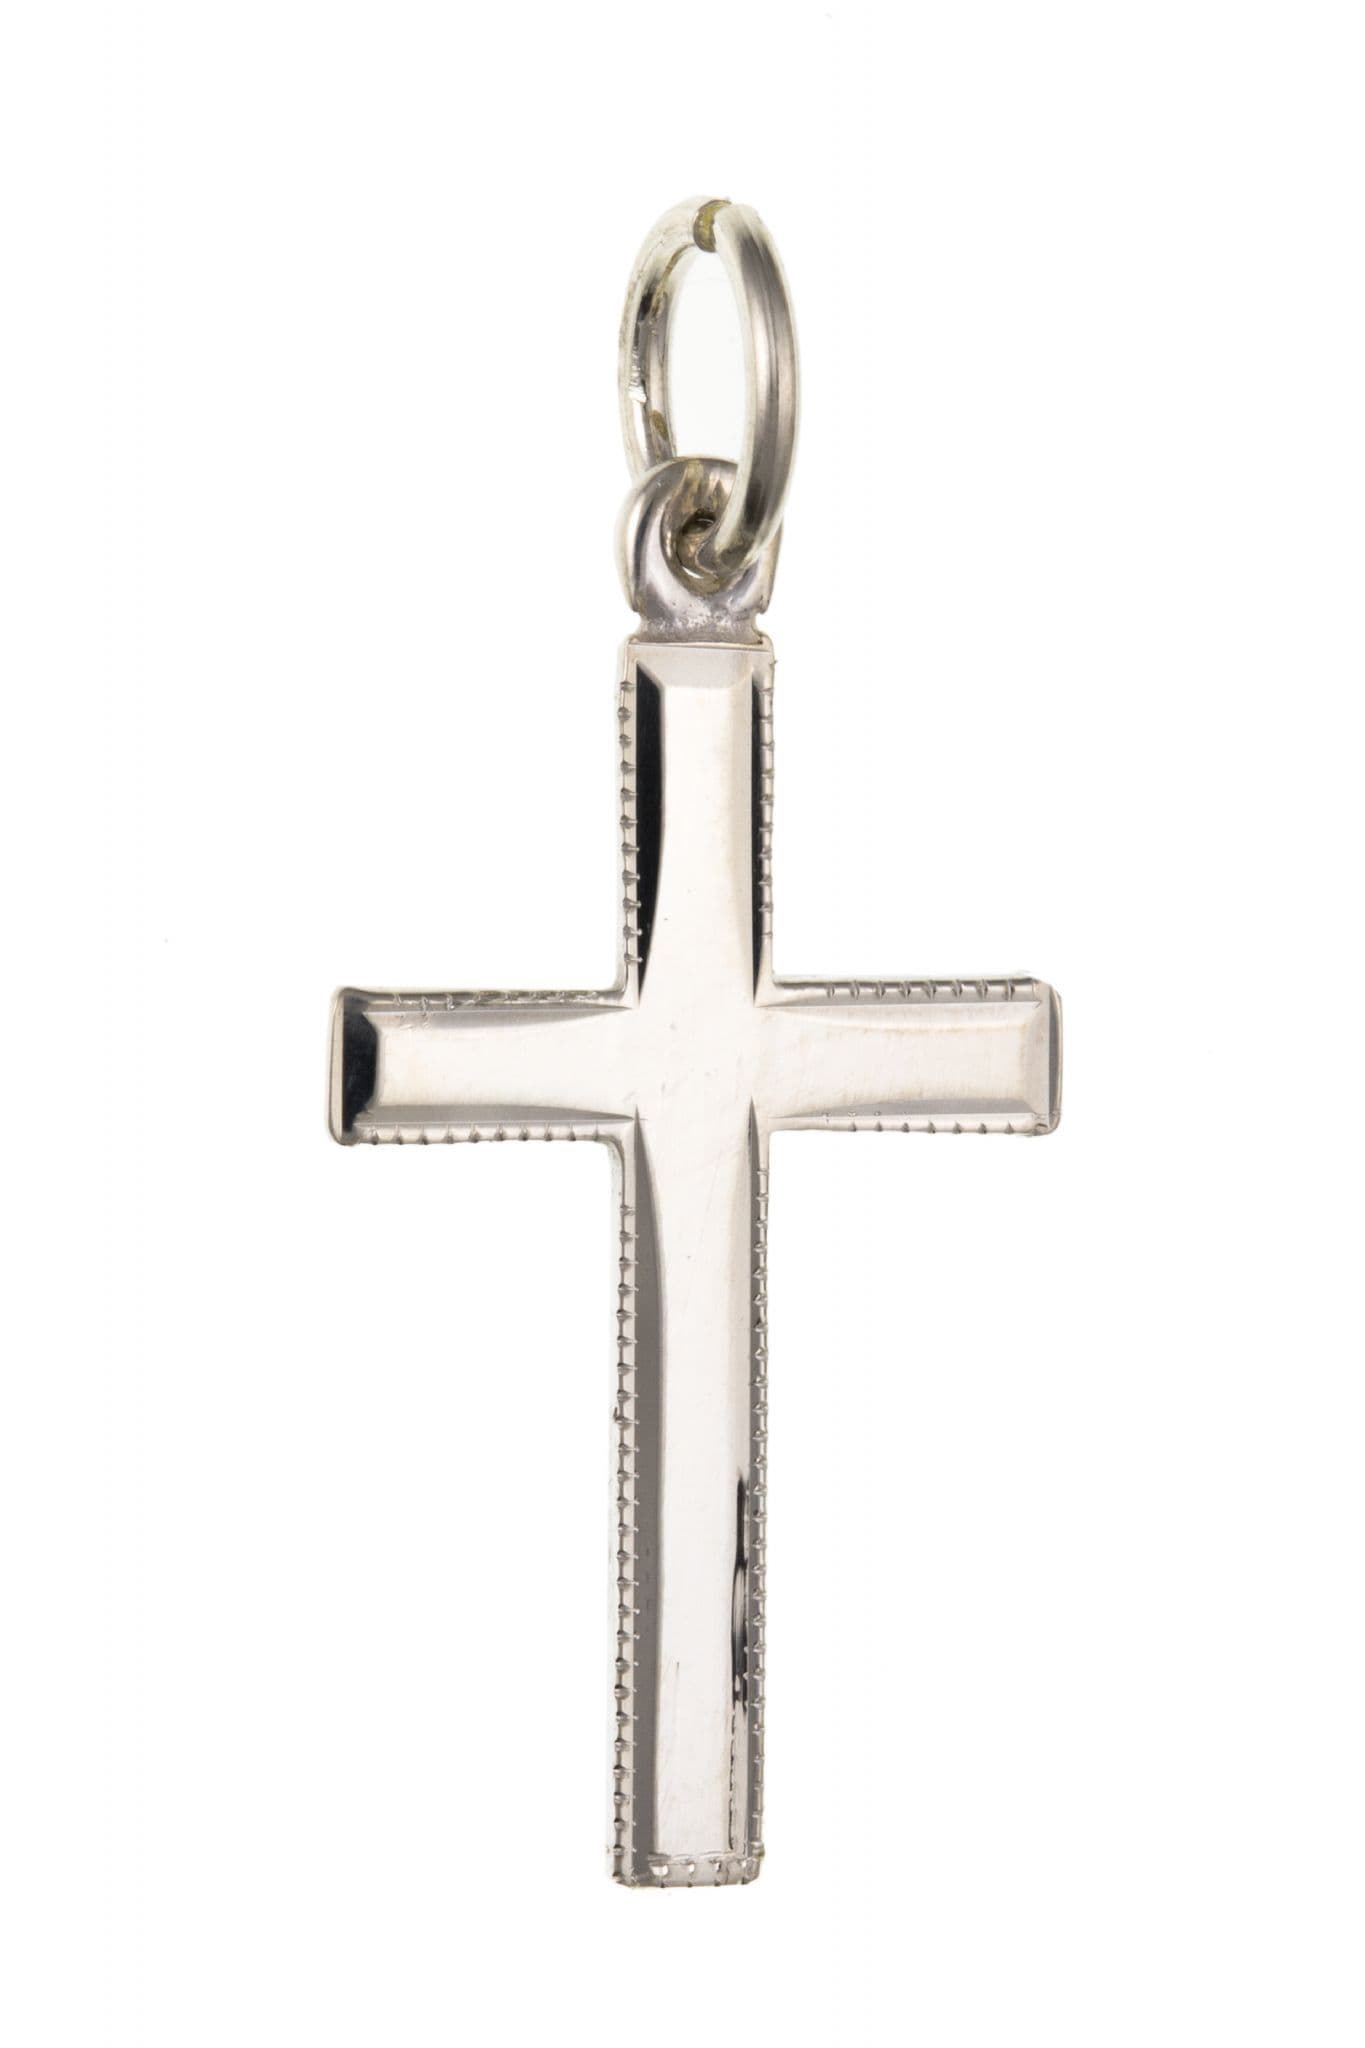 Solid sterling silver beaded edged cross with chain